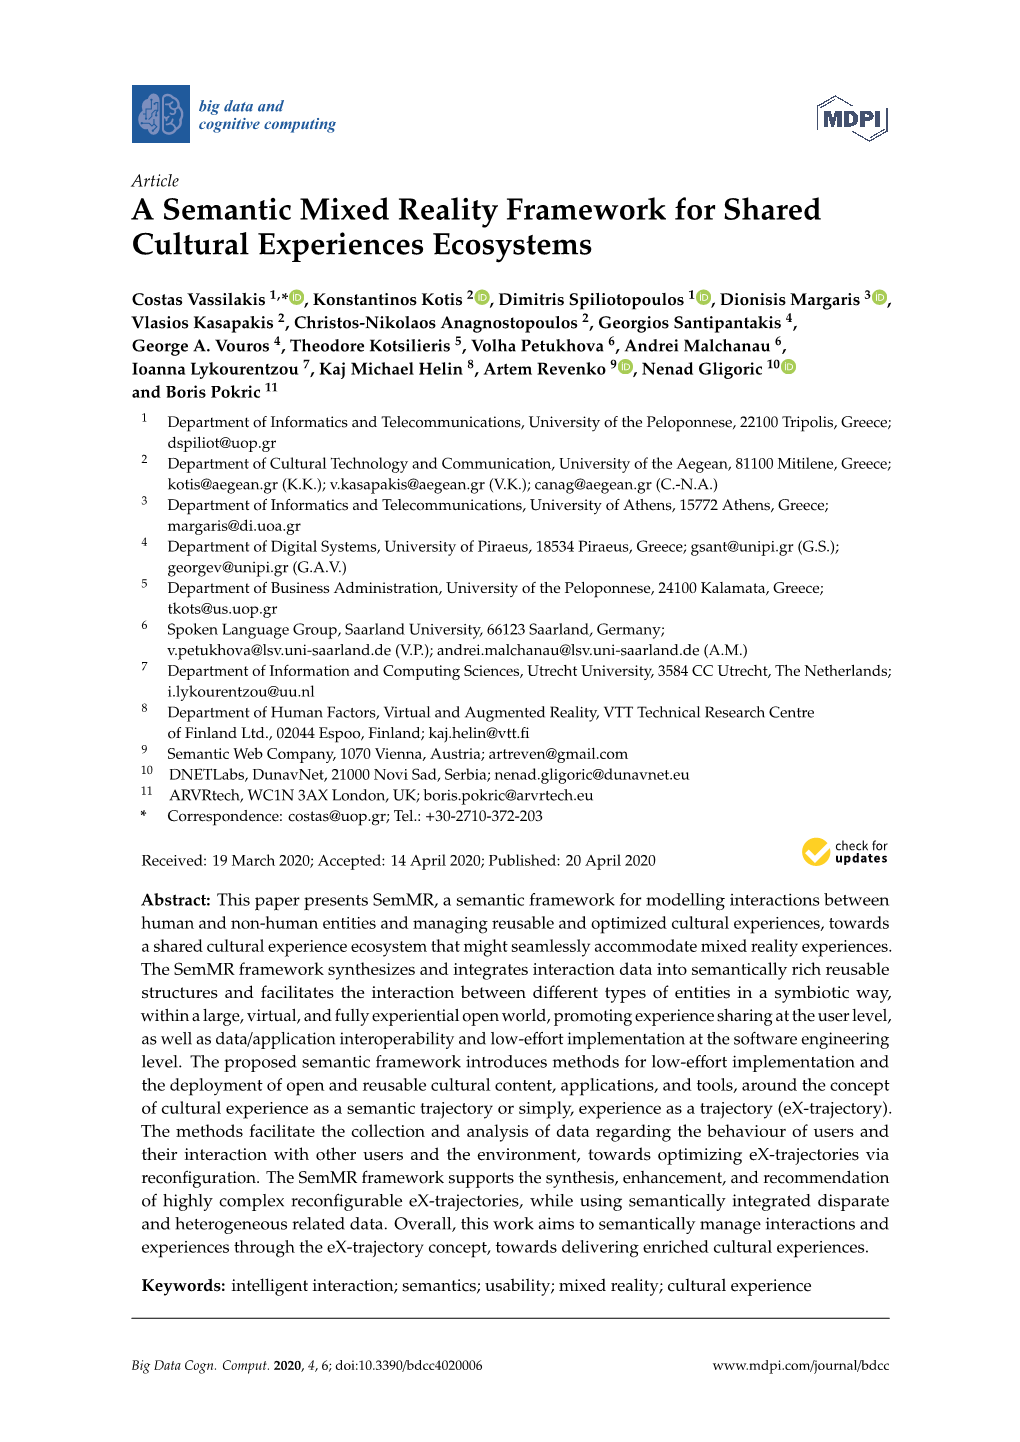 A Semantic Mixed Reality Framework for Shared Cultural Experiences Ecosystems